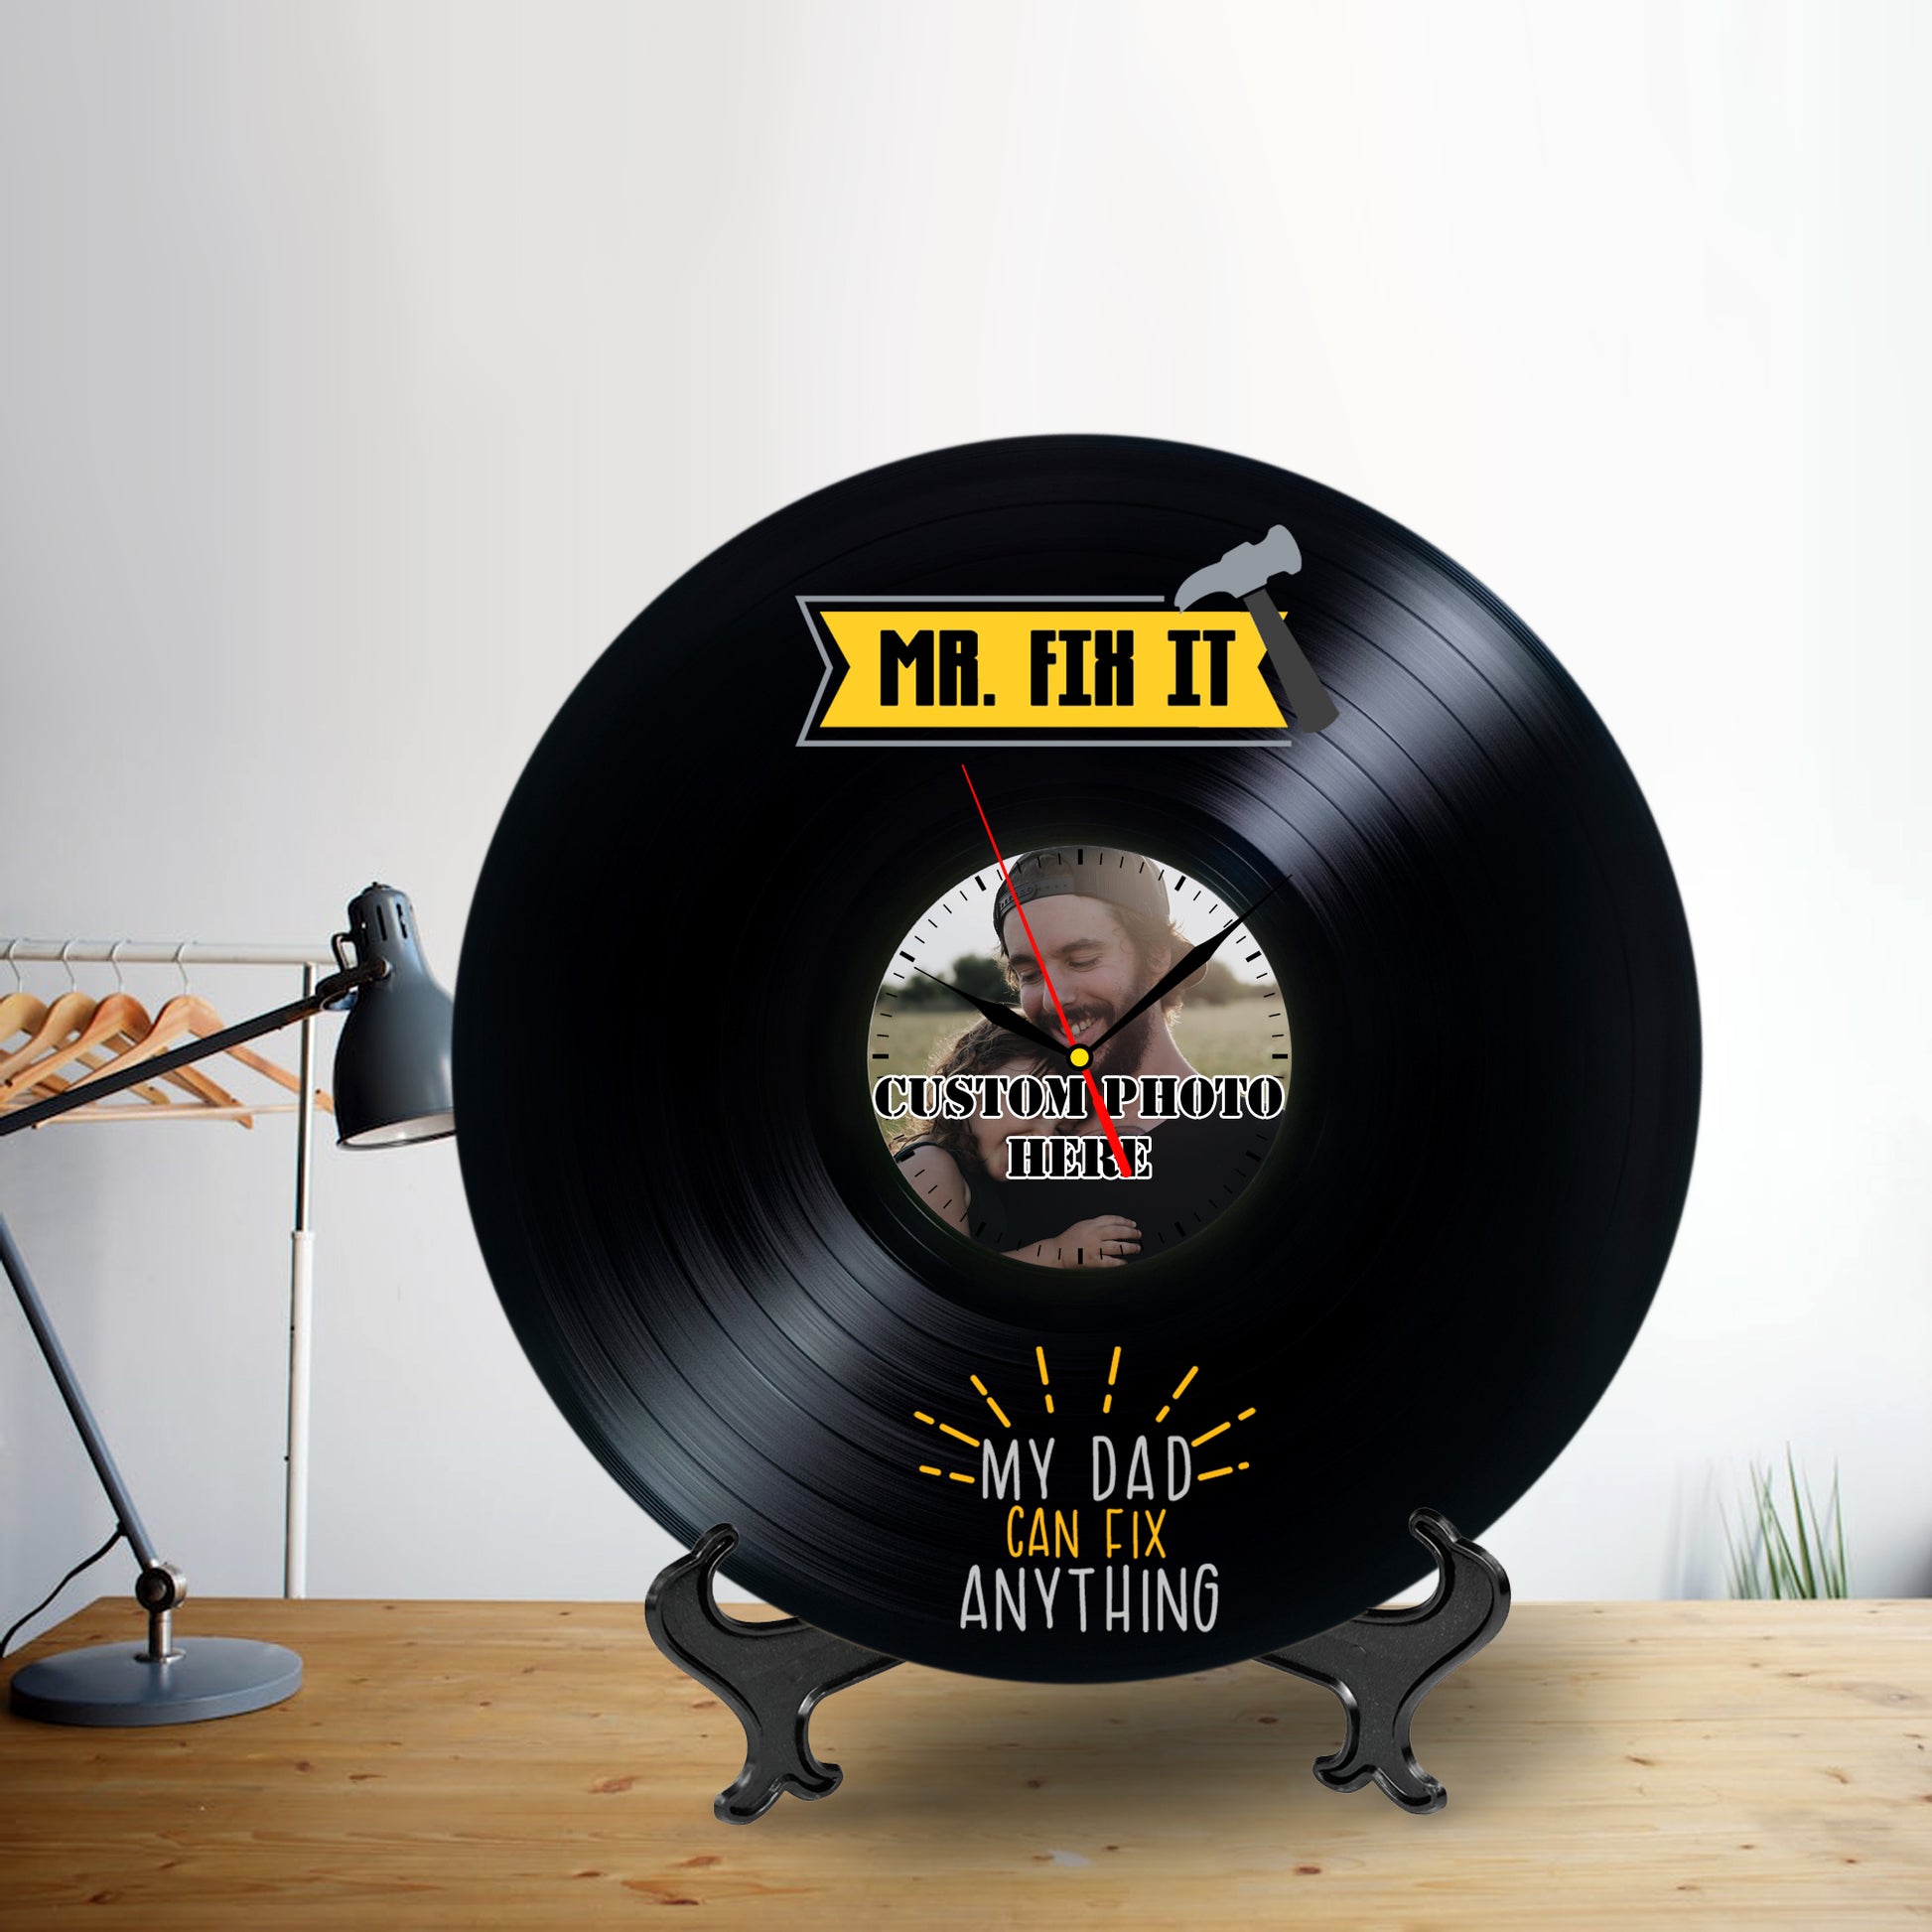 Personalized Photo Lp Record Clock Gift for Plumber Dad